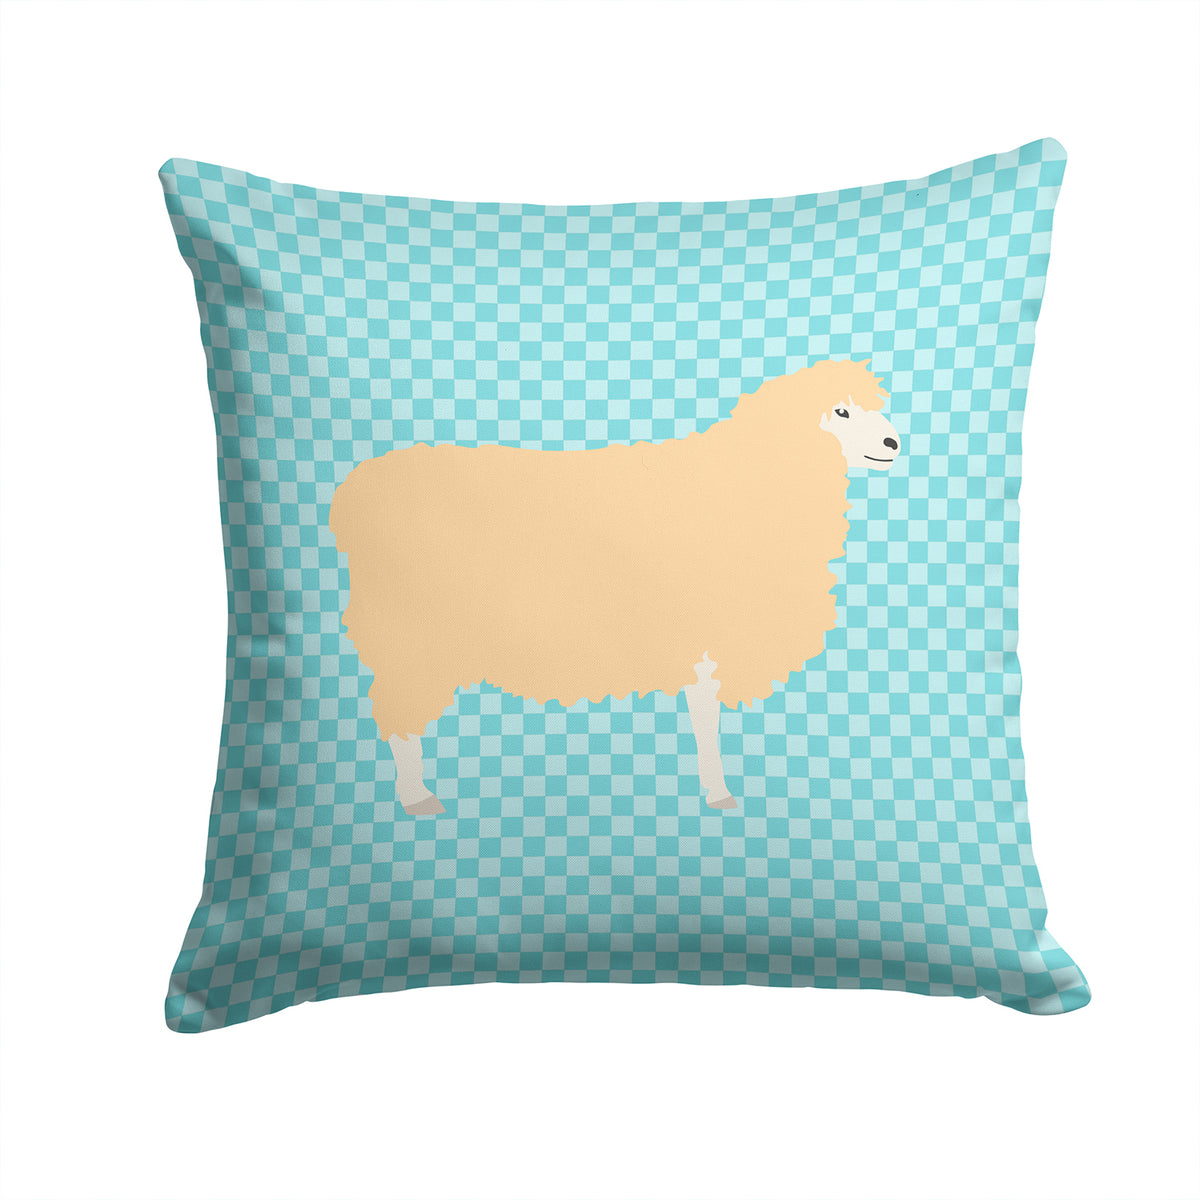 English Leicester Longwool Sheep Blue Check Fabric Decorative Pillow BB8148PW1414 - the-store.com